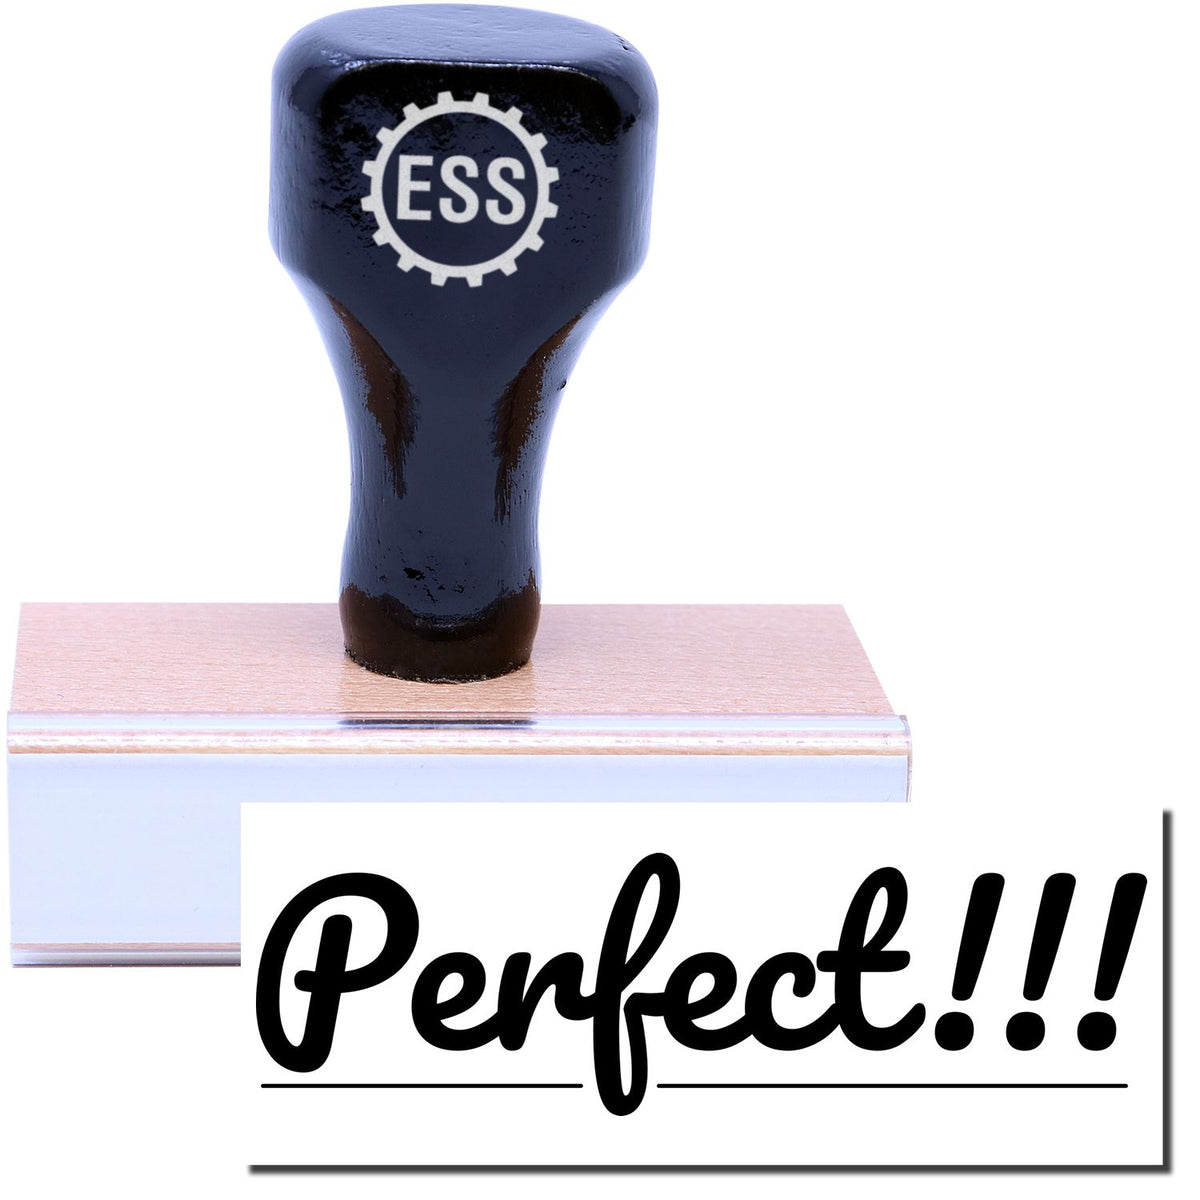 A stock office rubber stamp with a stamped image showing how the text &quot;Perfect!!!&quot; in striking font with multiple exclamation points is displayed after stamping.